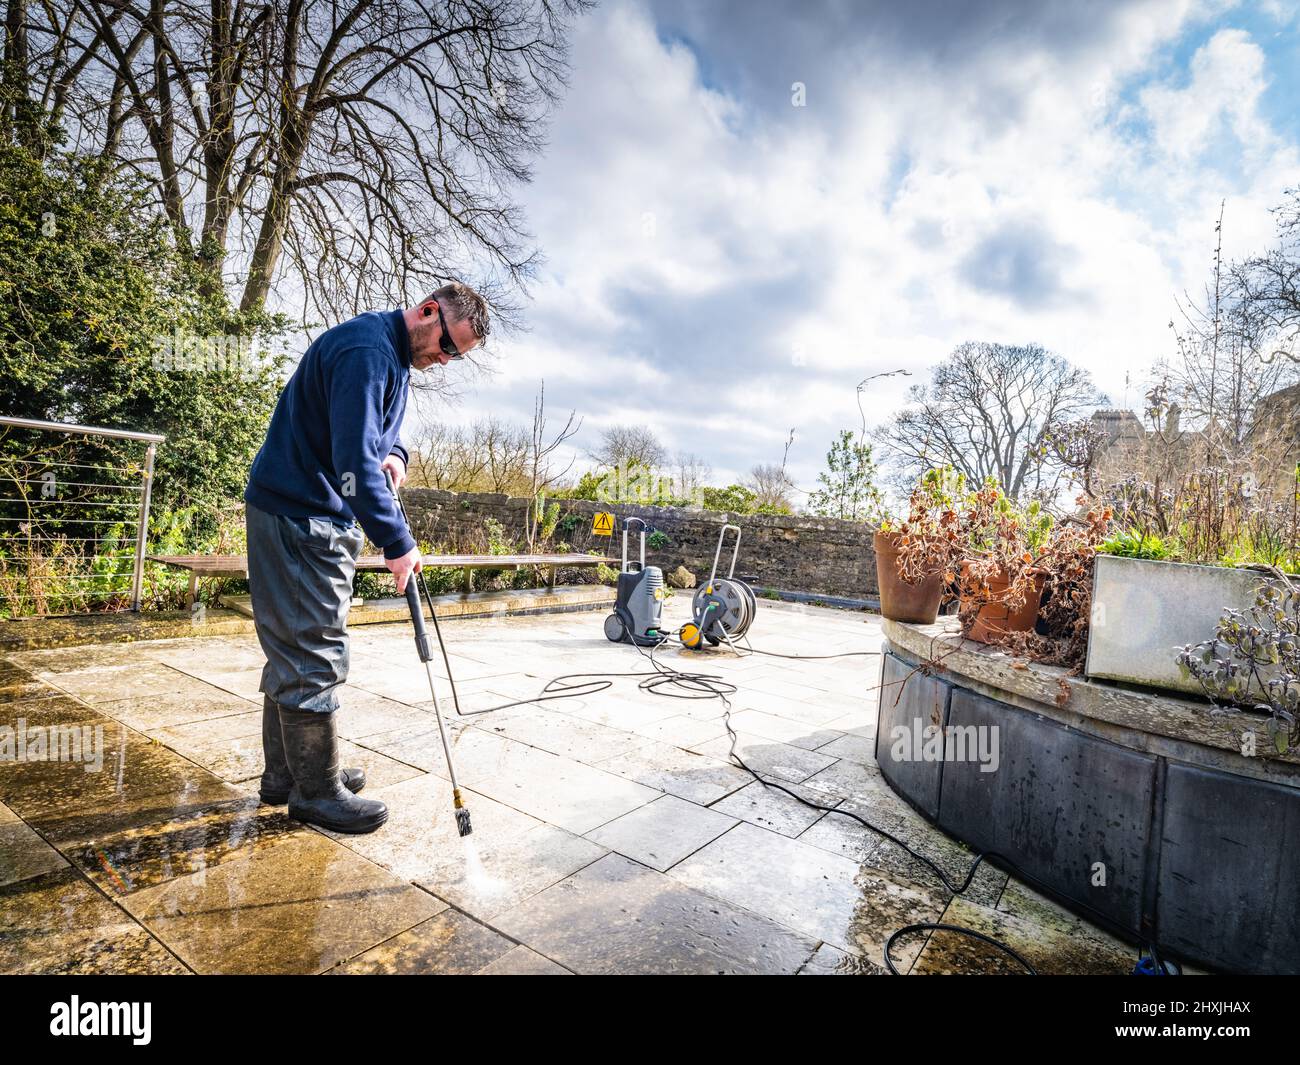 A groundsman working at Corpus Christi College, Oxford, Known as CCC a constituent colleges of Oxford Univerity. Stock Photo